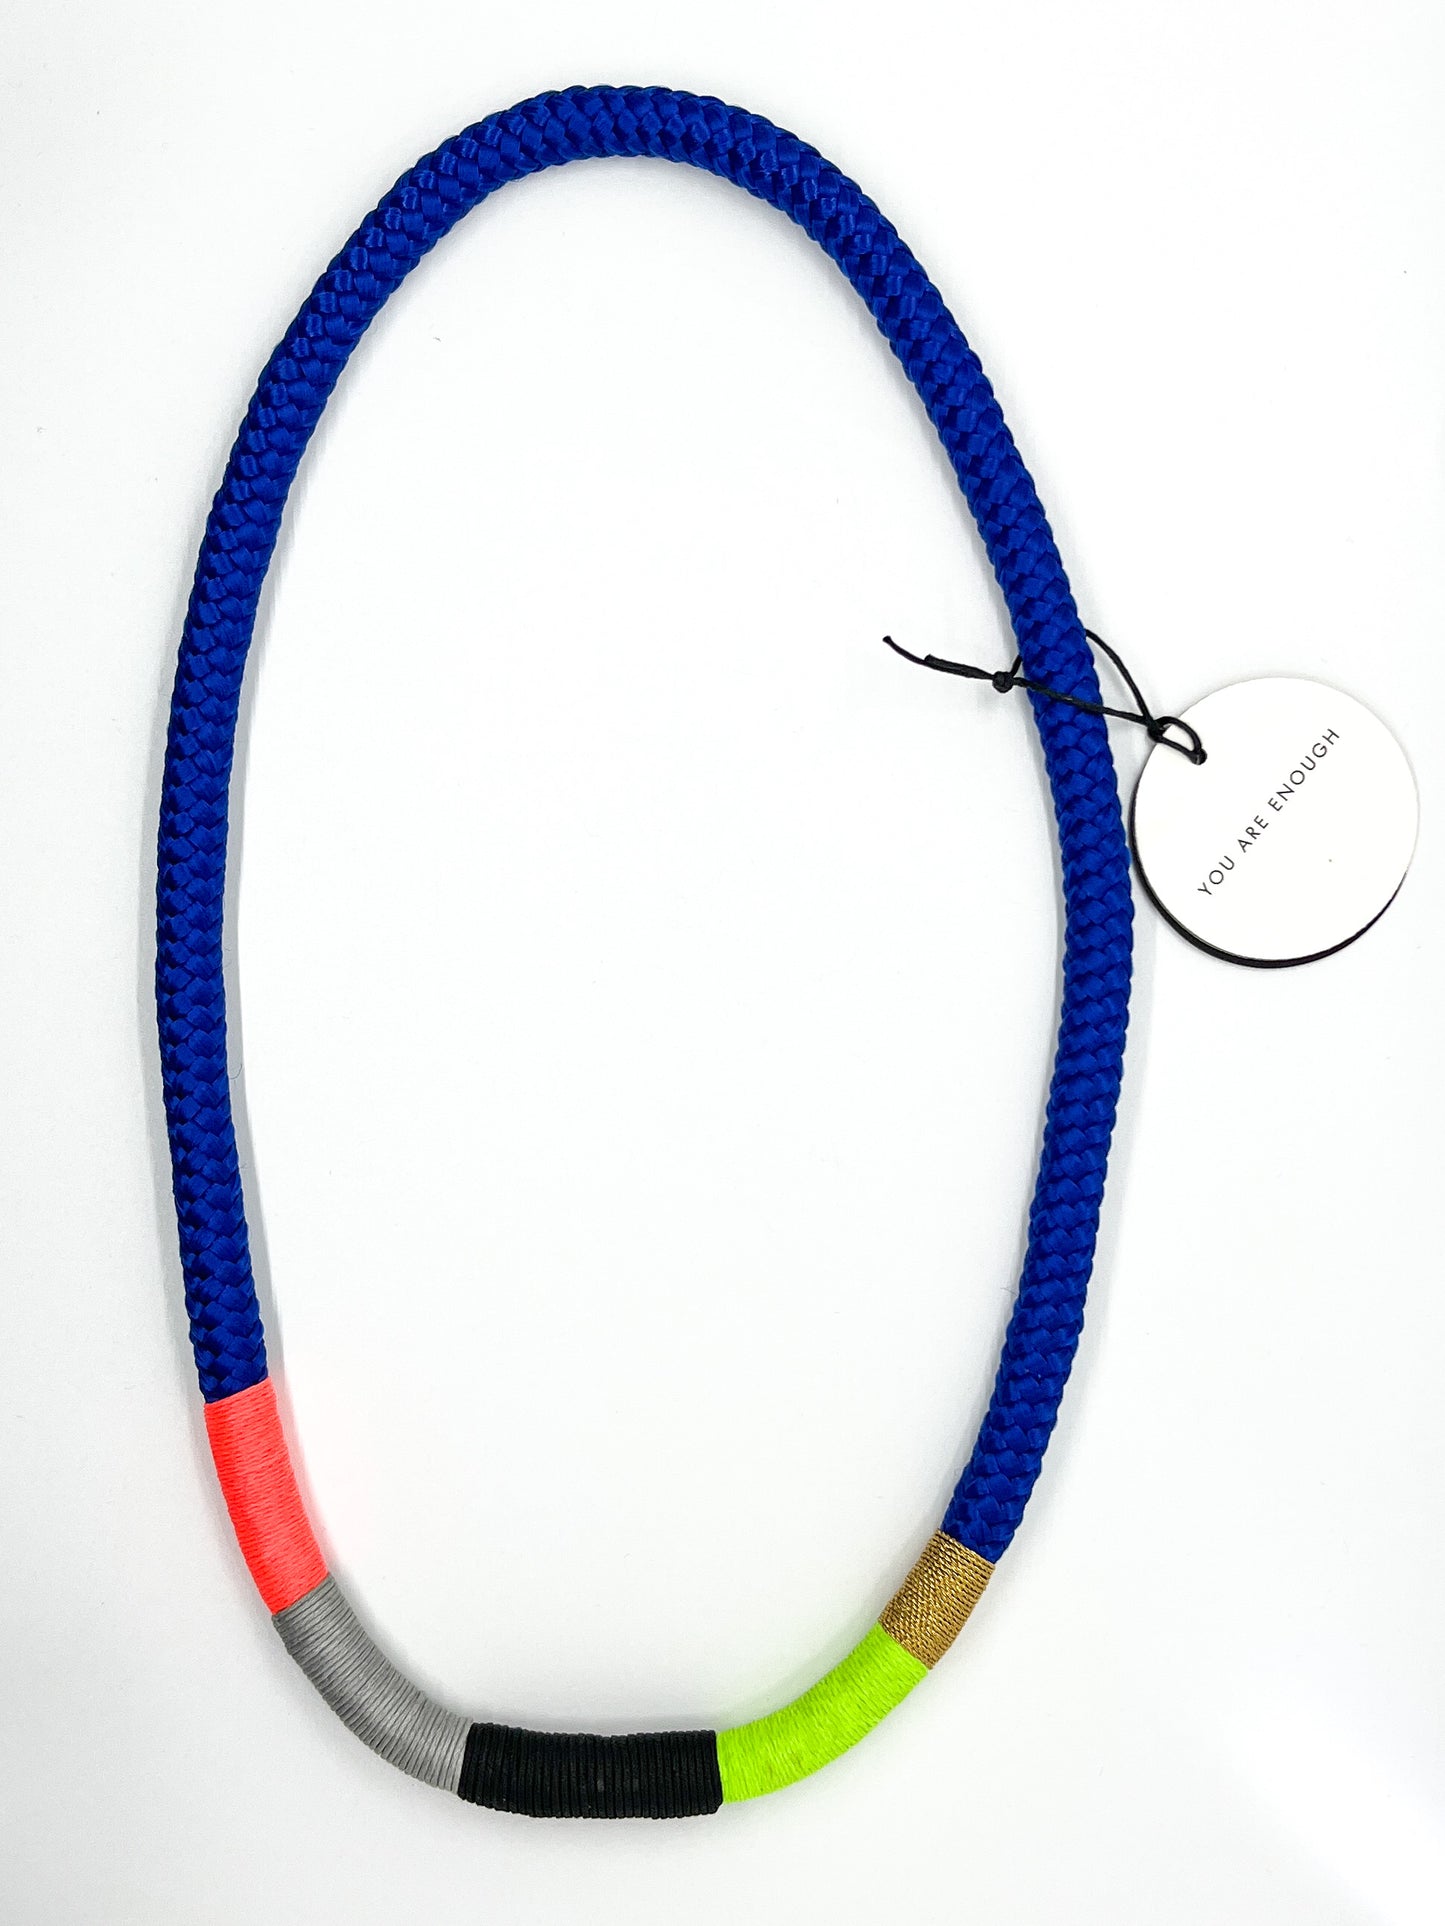 Thin Ndebele Necklace